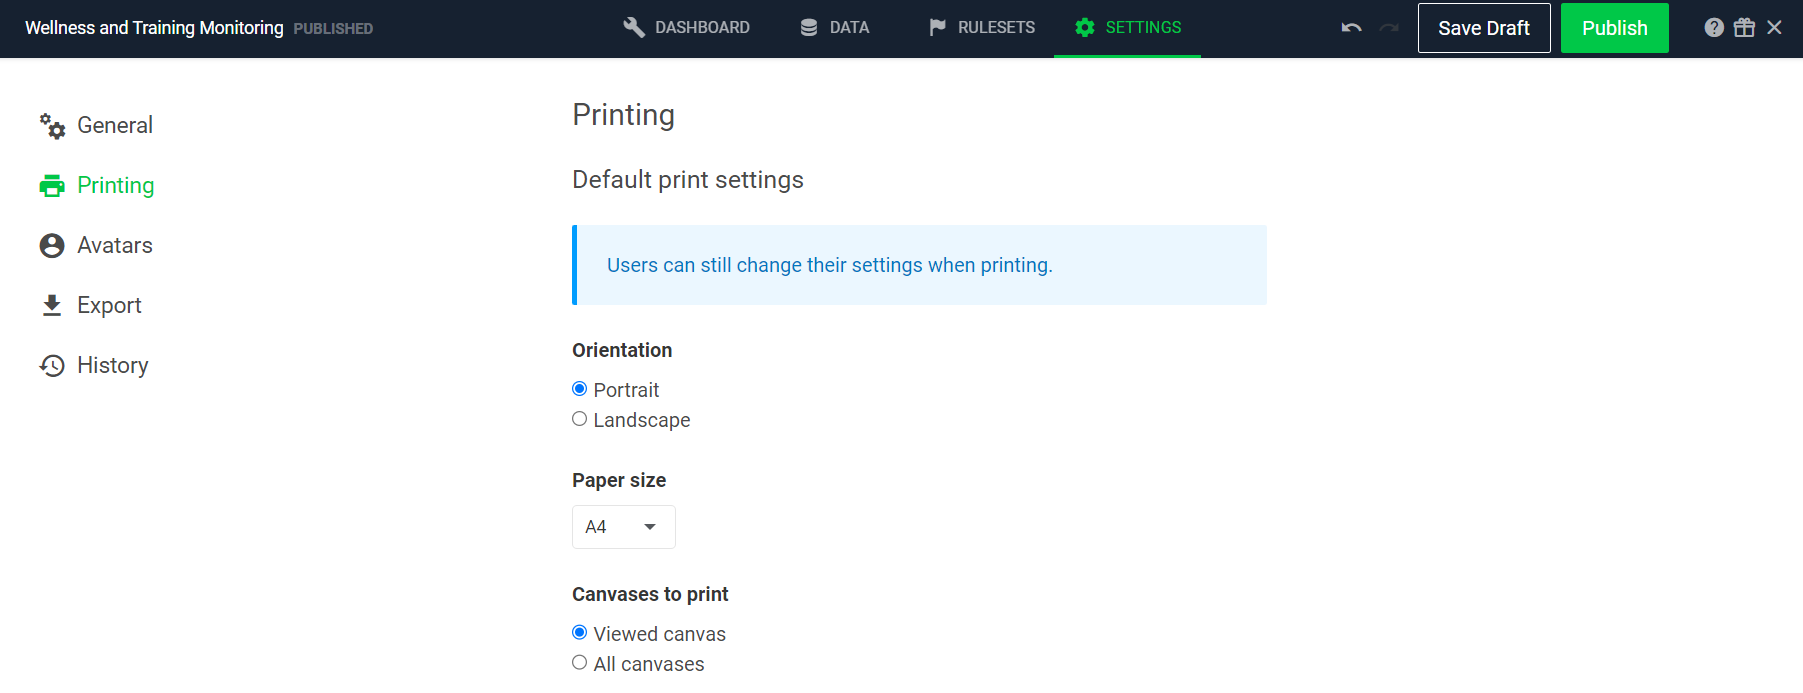 An image of the Printing page in dashboard settings.